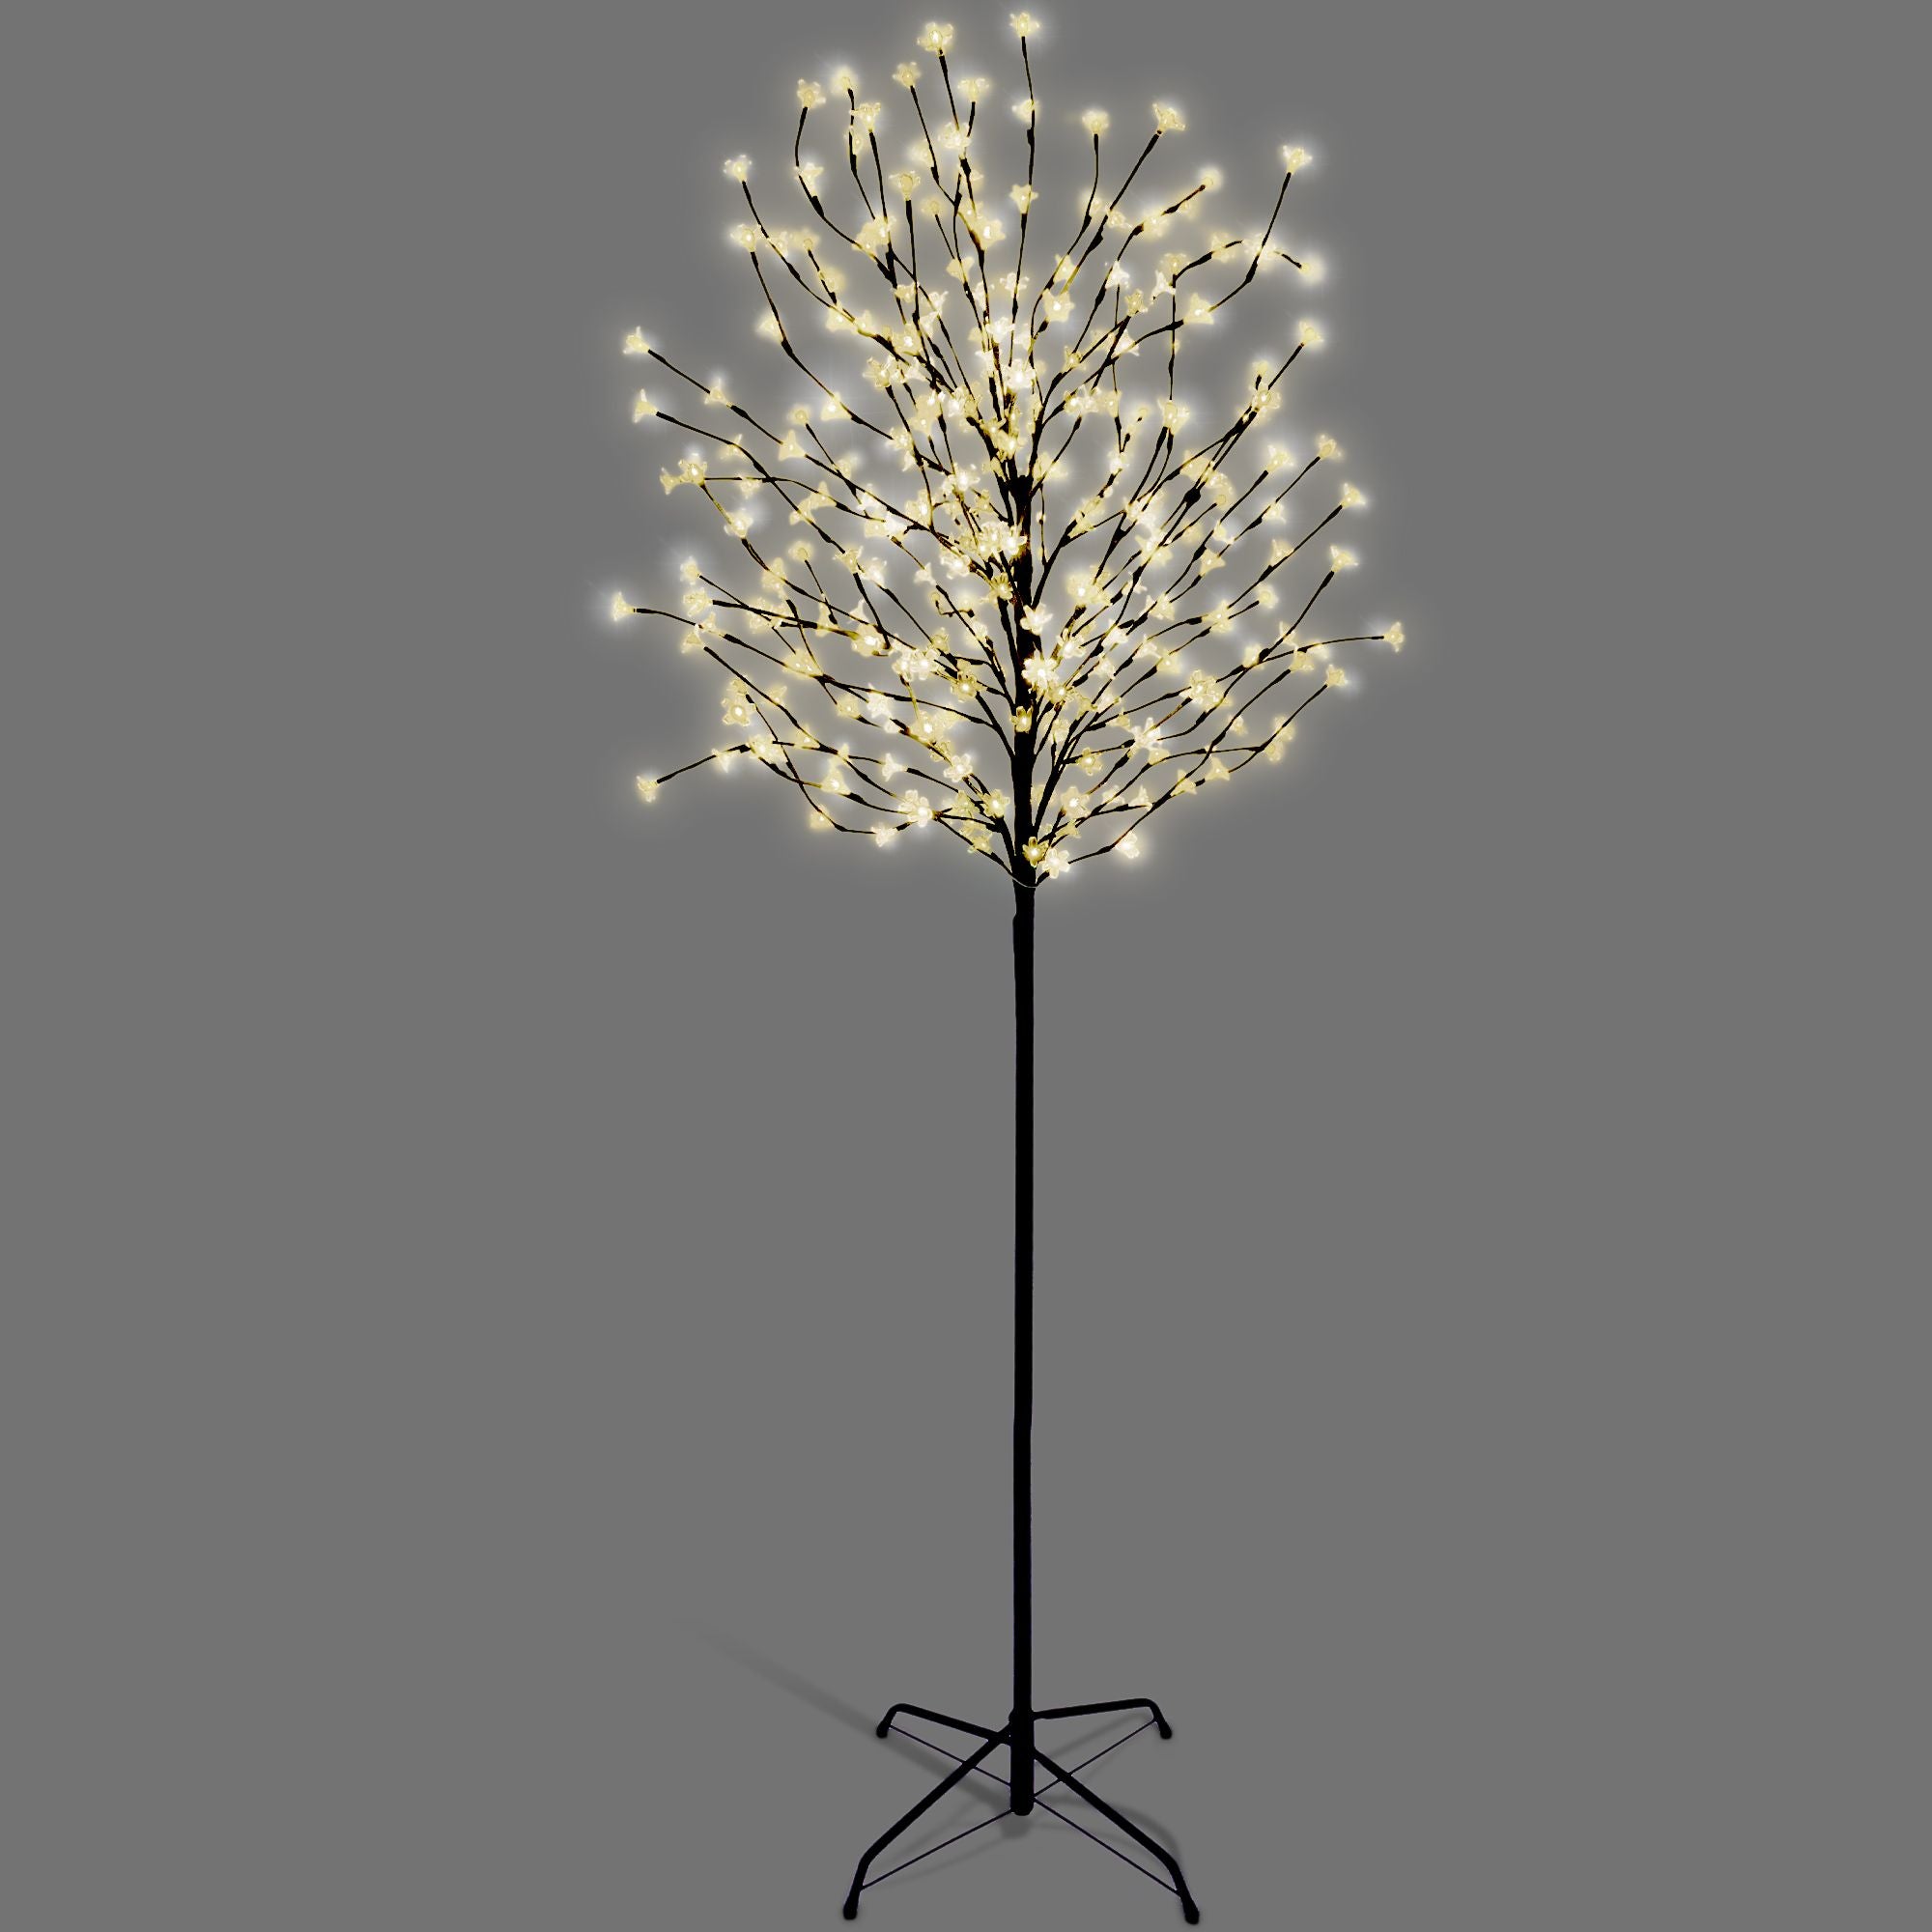 NETTA 5FT LED Cherry Blossom Tree, 250 Pre-Lit Lights, Auto-Off Timer and 8 Lighting Modes, 3M Power Cable, Suitable for Indoor and Outdoor Use - Warm White